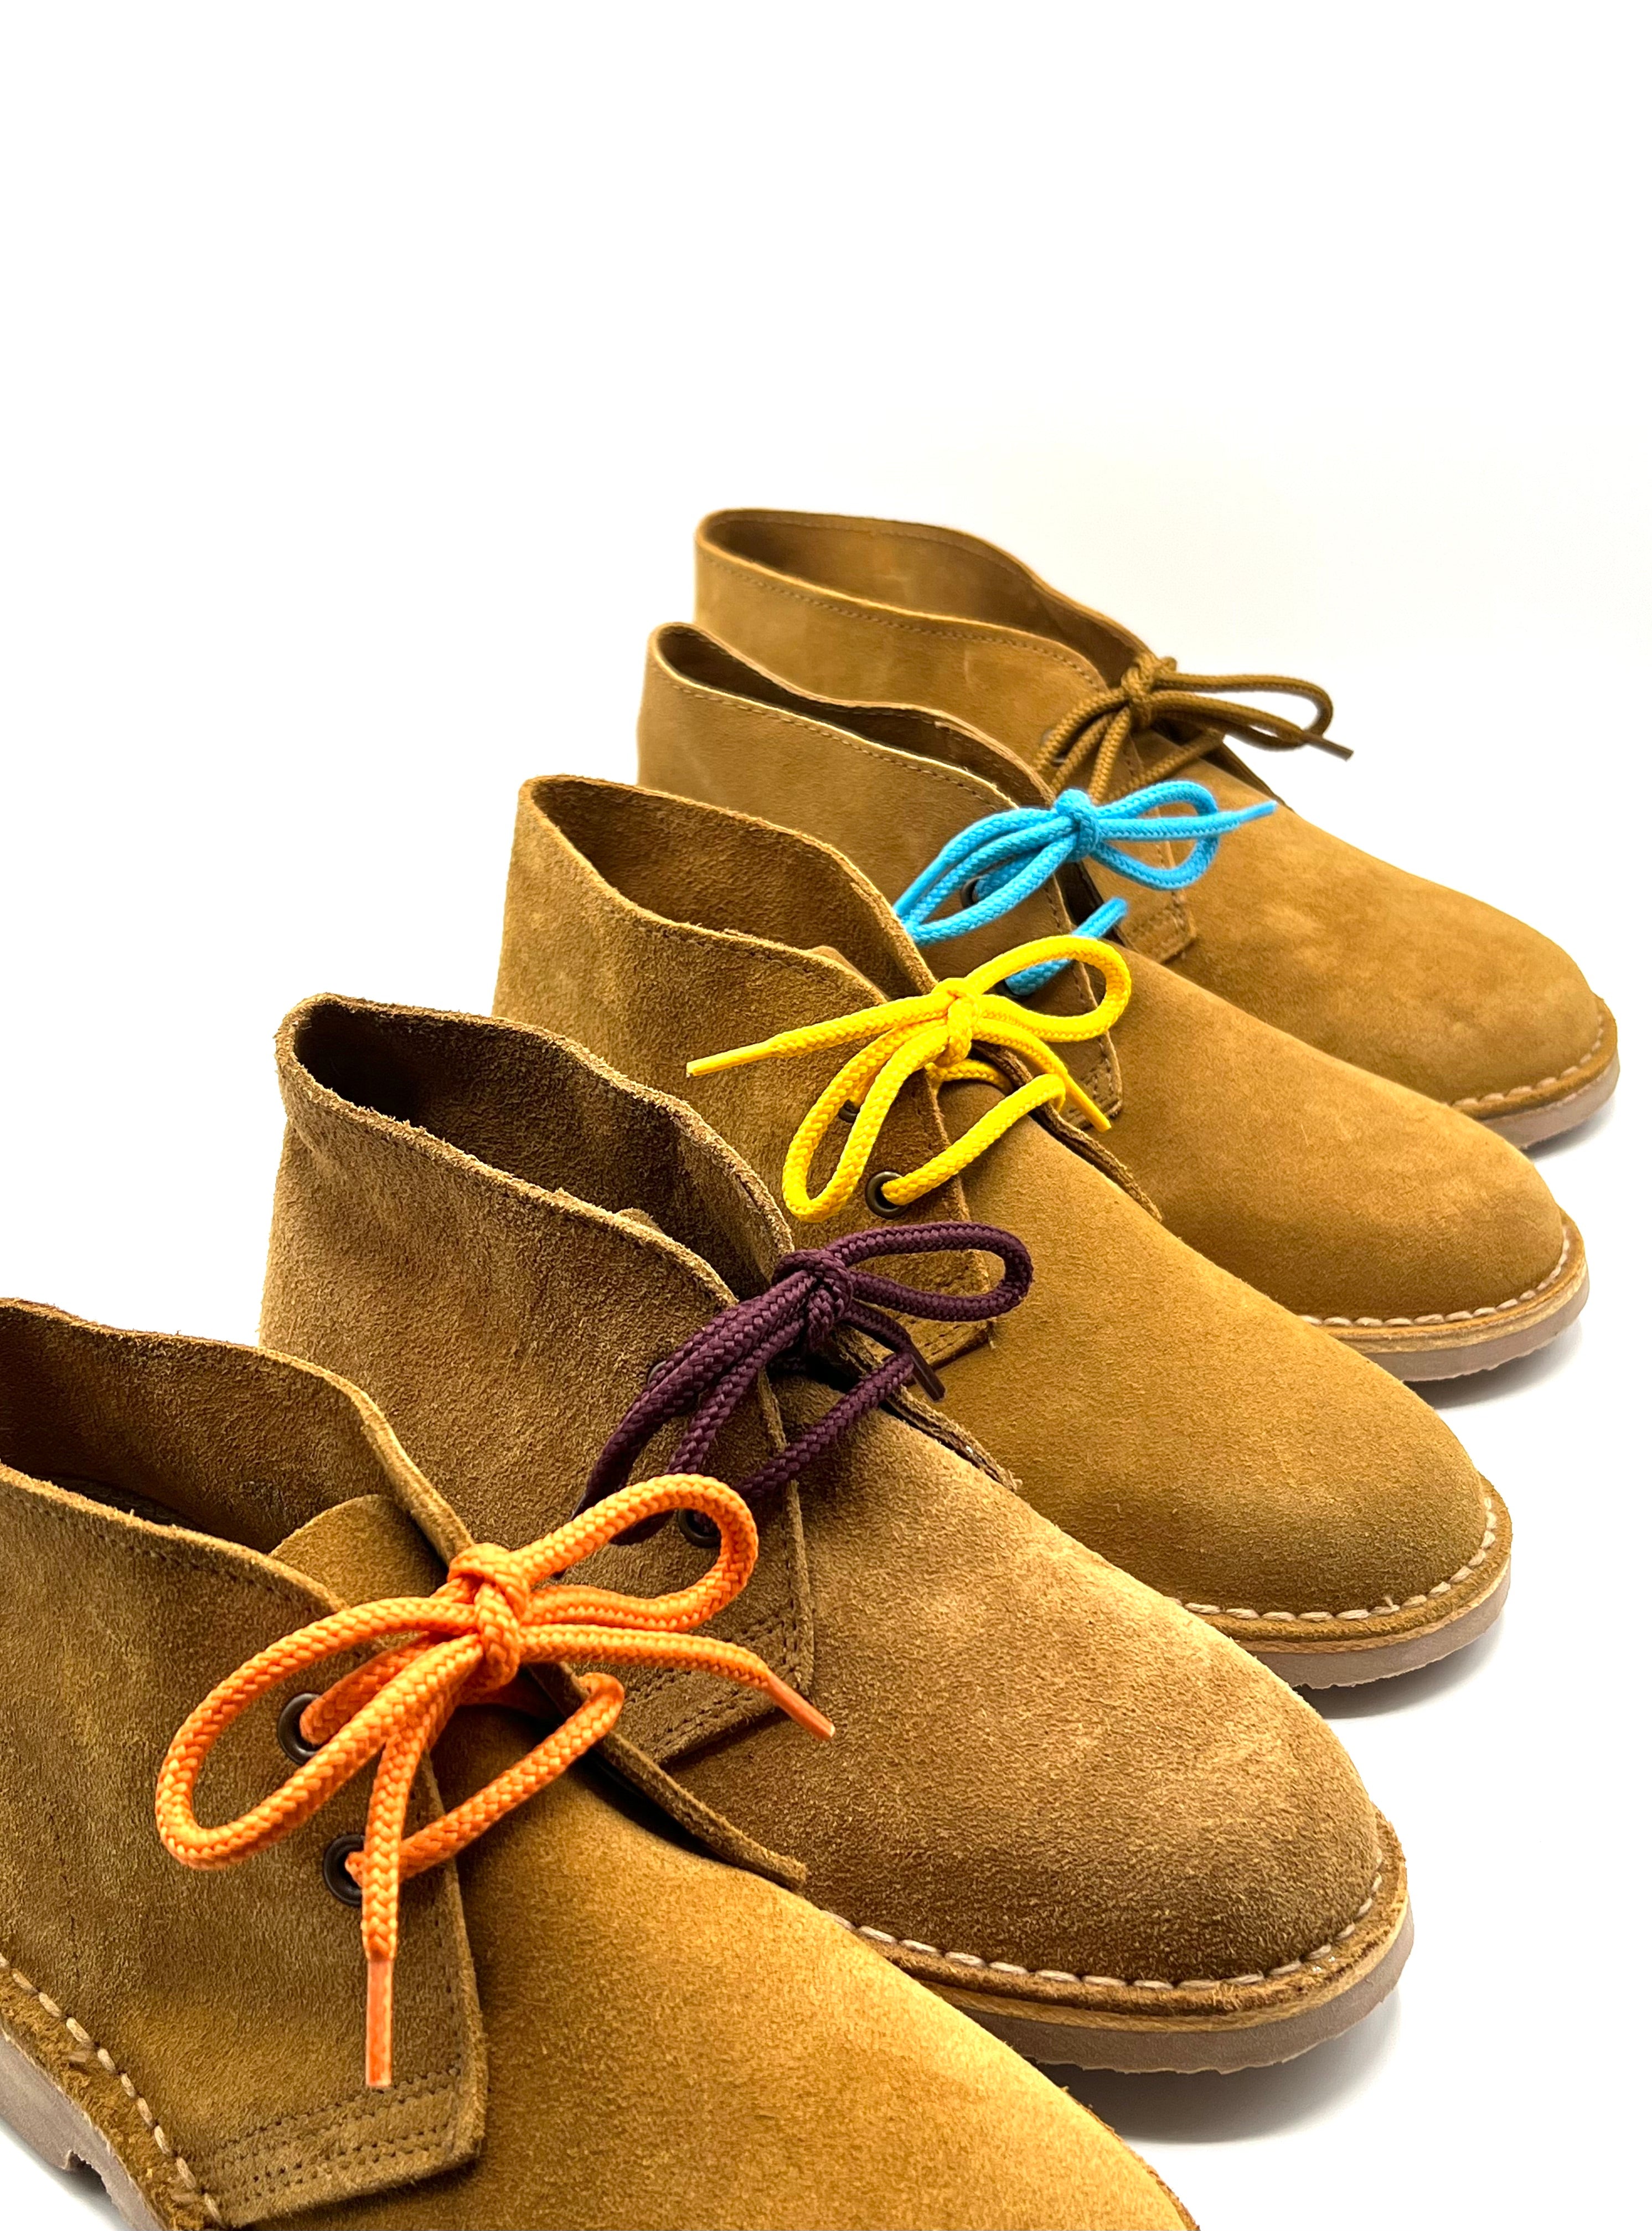 Where to Buy Clarks Desert Boot Laces?